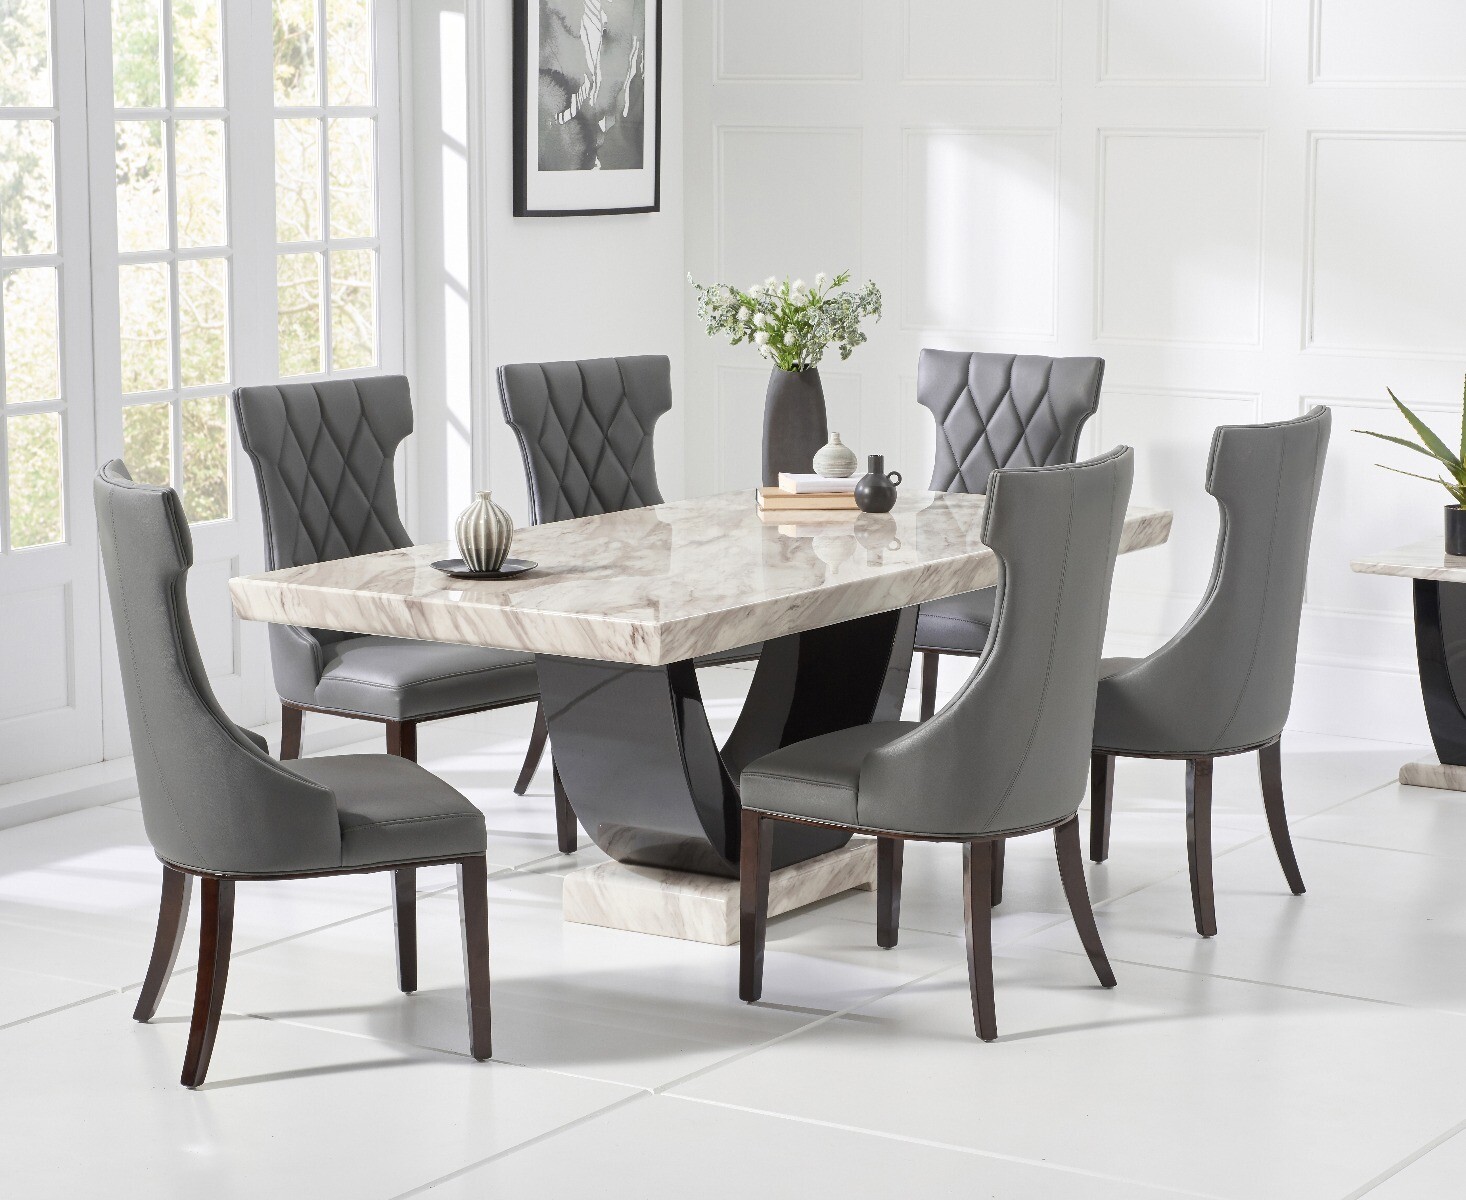 Photo 1 of Raphael 170cm cream and black pedestal marble dining table with 4 cream sophia chairs